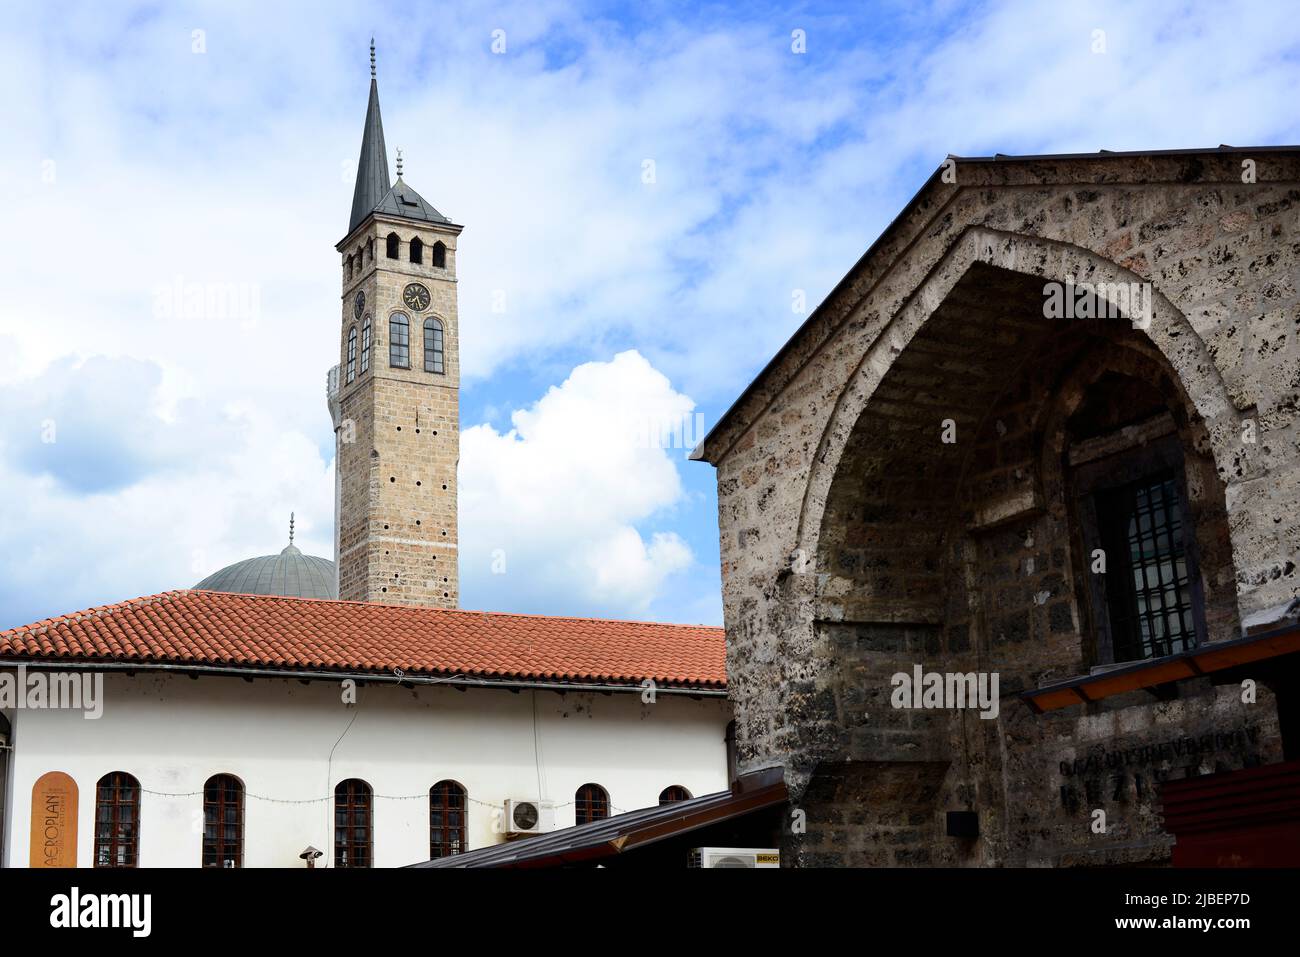 Gazi Husrev-beg Mosque, clock tower and other historical buildings in the old town in Sarajevo, Bosnia & Herzegovina. Stock Photo